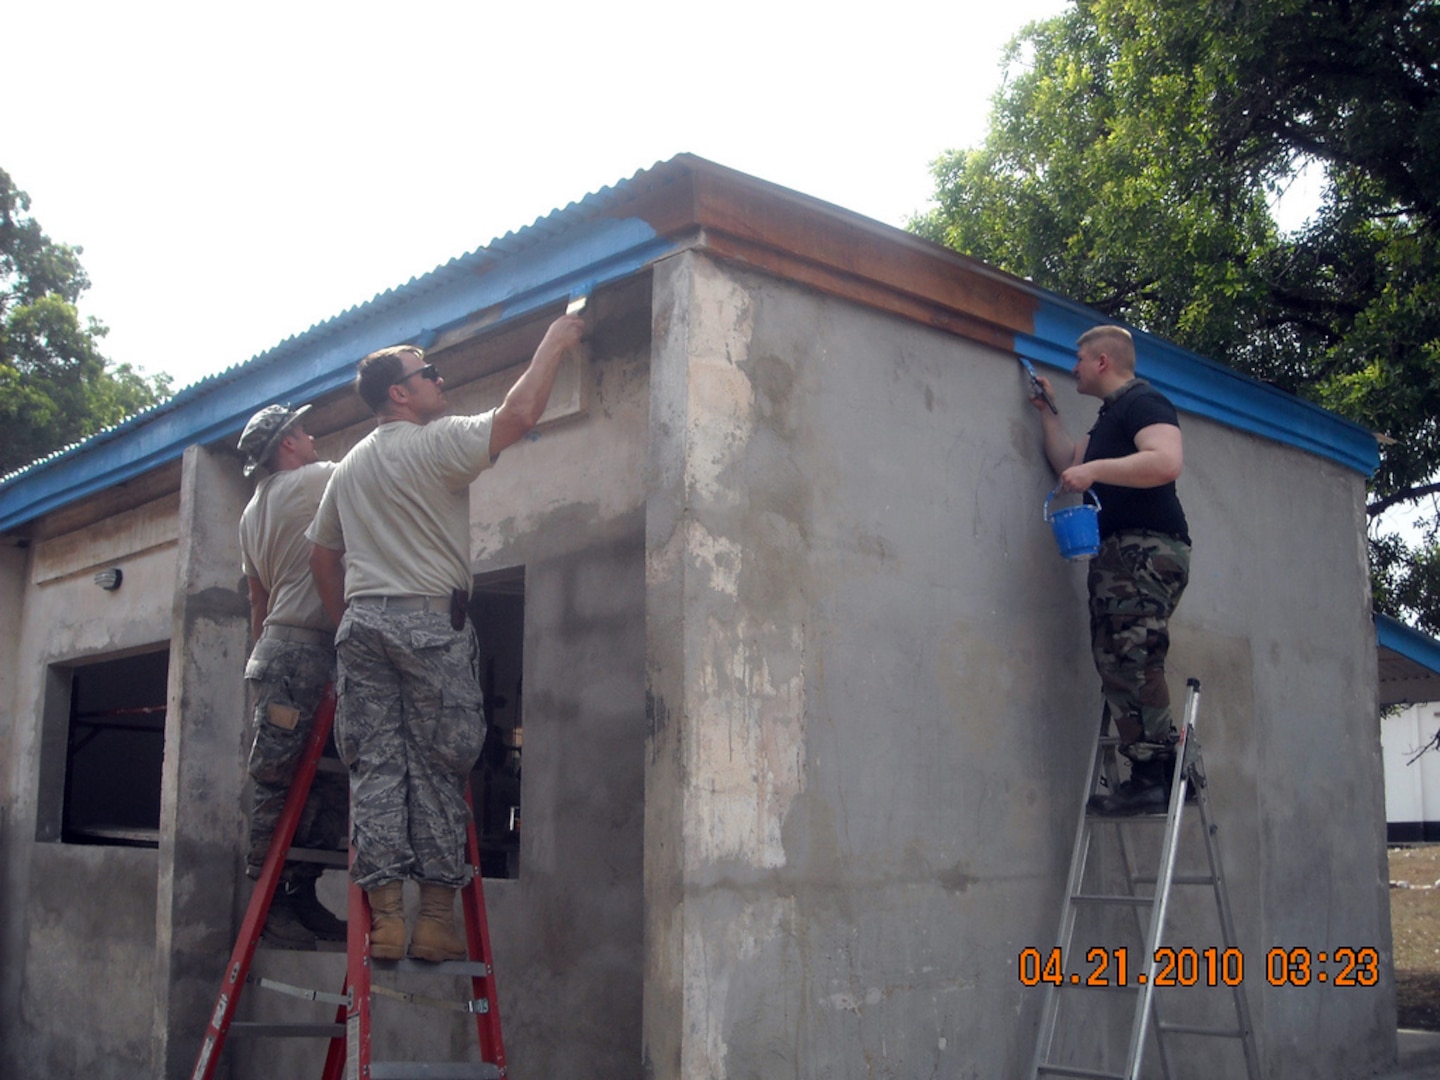 Airmen with the North Dakota National Guard's 119th Wing Civil Engineer Squadron paint the trim on a building on Burma Camp near Accra, Ghana. The building will serve as classrooms to train members of the Ghanaian Armed Forces. The two-week mission for the North Dakota Airmen is providing valuable training on contingency skills while helping Ghana — North Dakota's pair in the State Partnership Program.